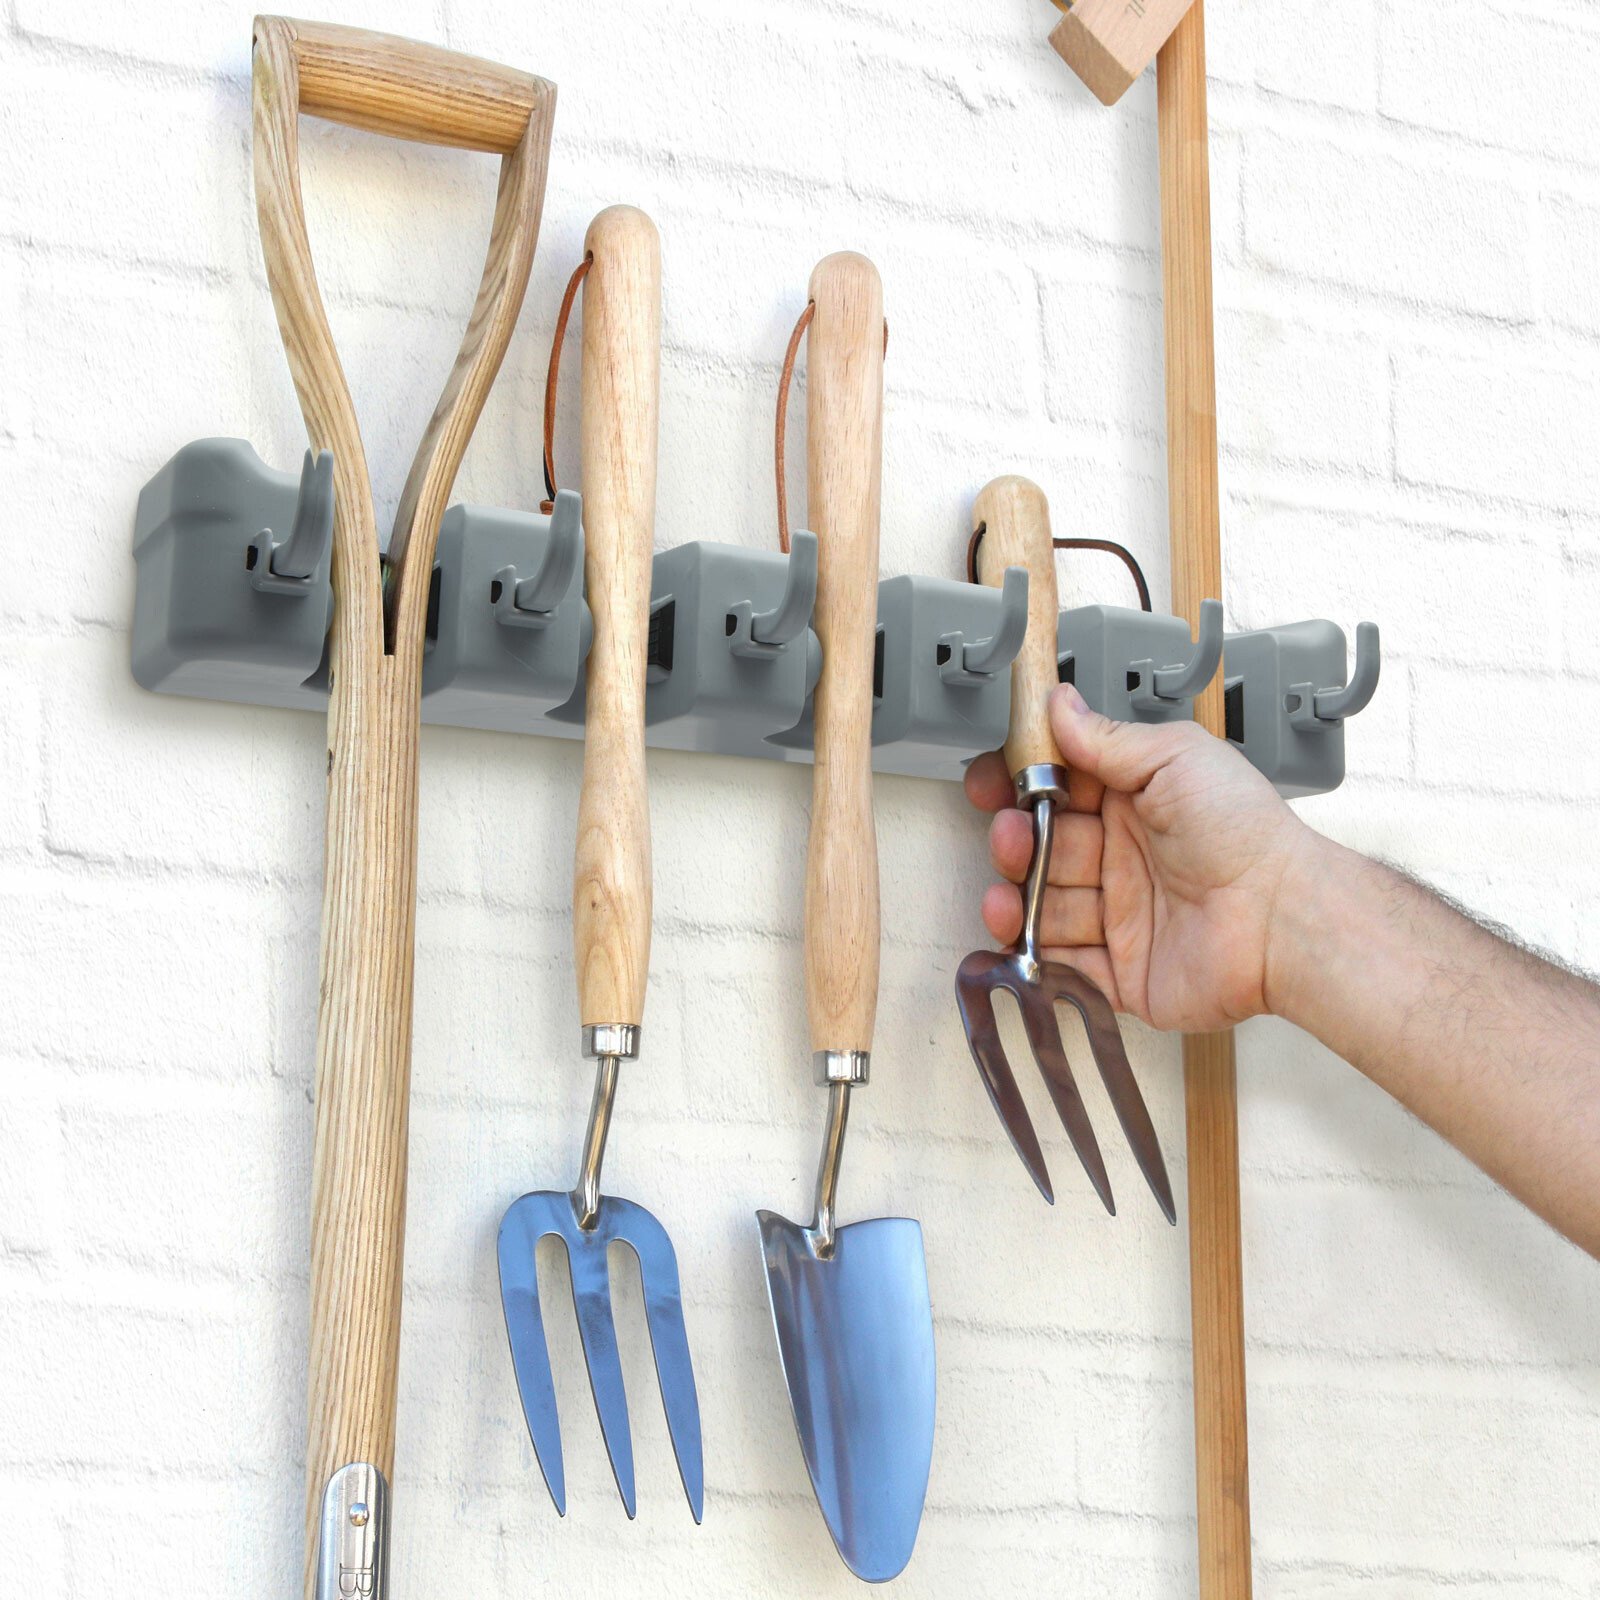 Universal wall cleaning tool / tool holder thumb